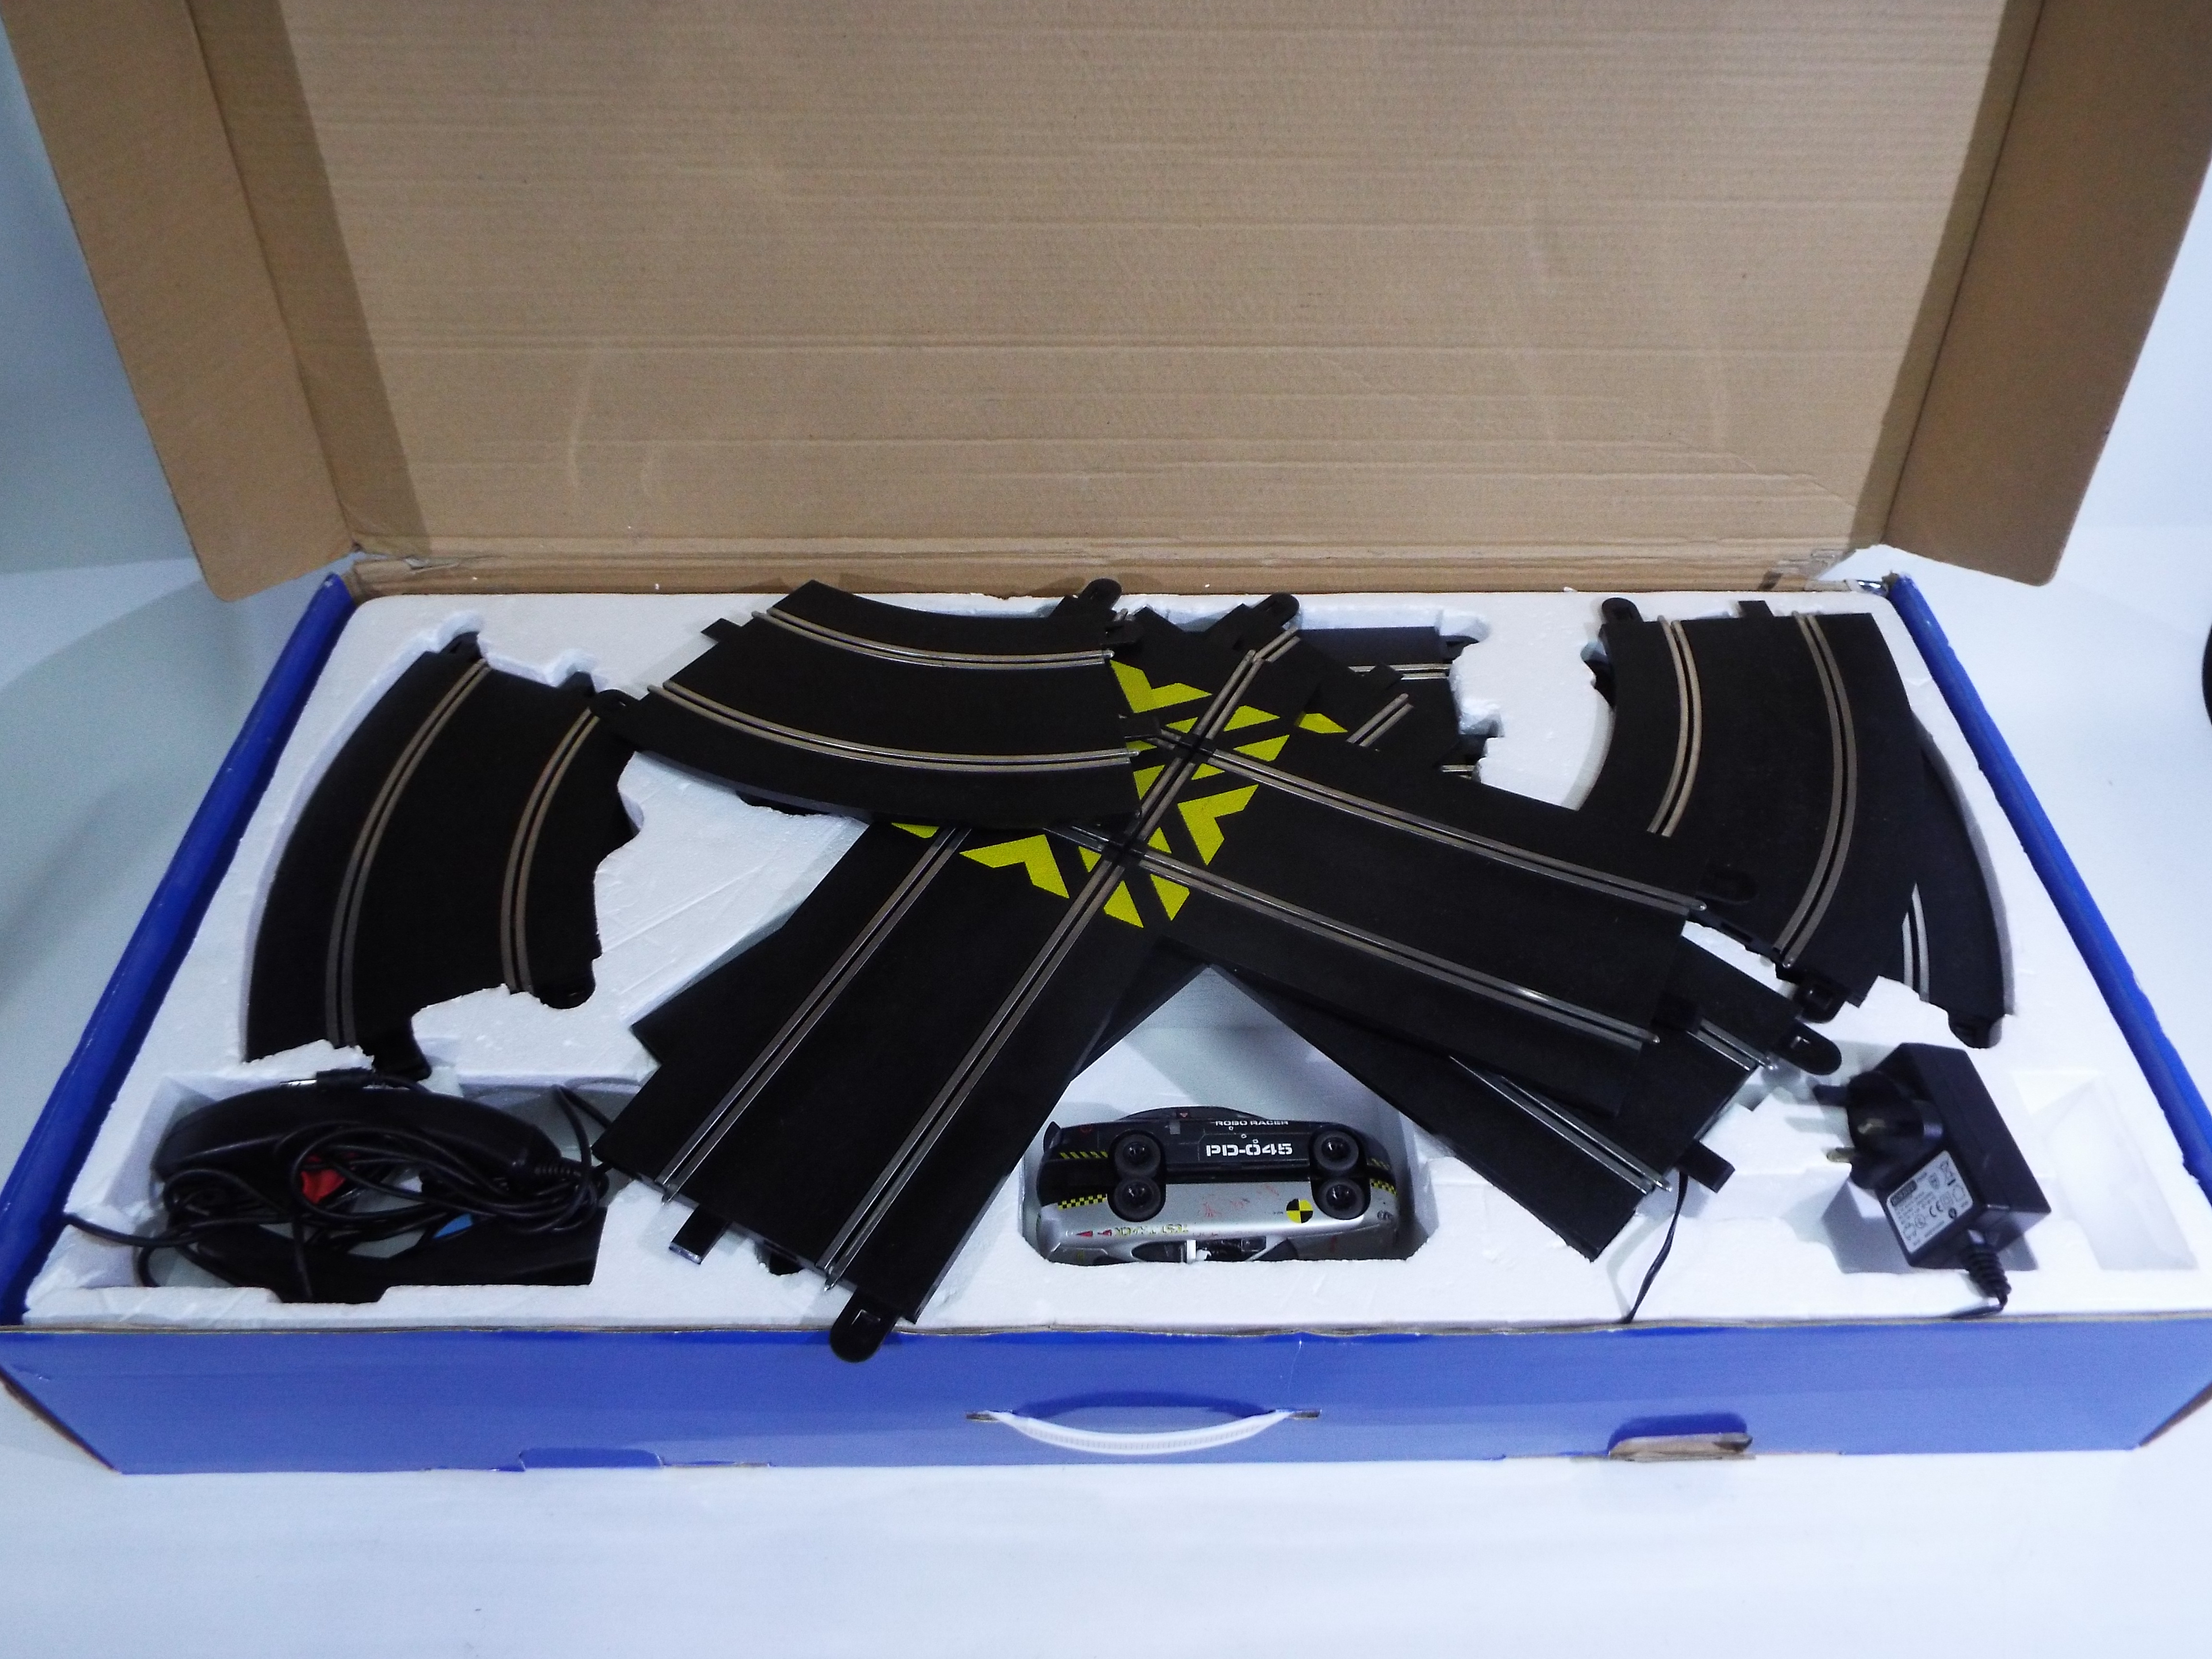 Scalextric - A boxed Scalextric 'Bash 'N Crash' racing set - The #C1259 racing set comes with 2 x - Image 3 of 3